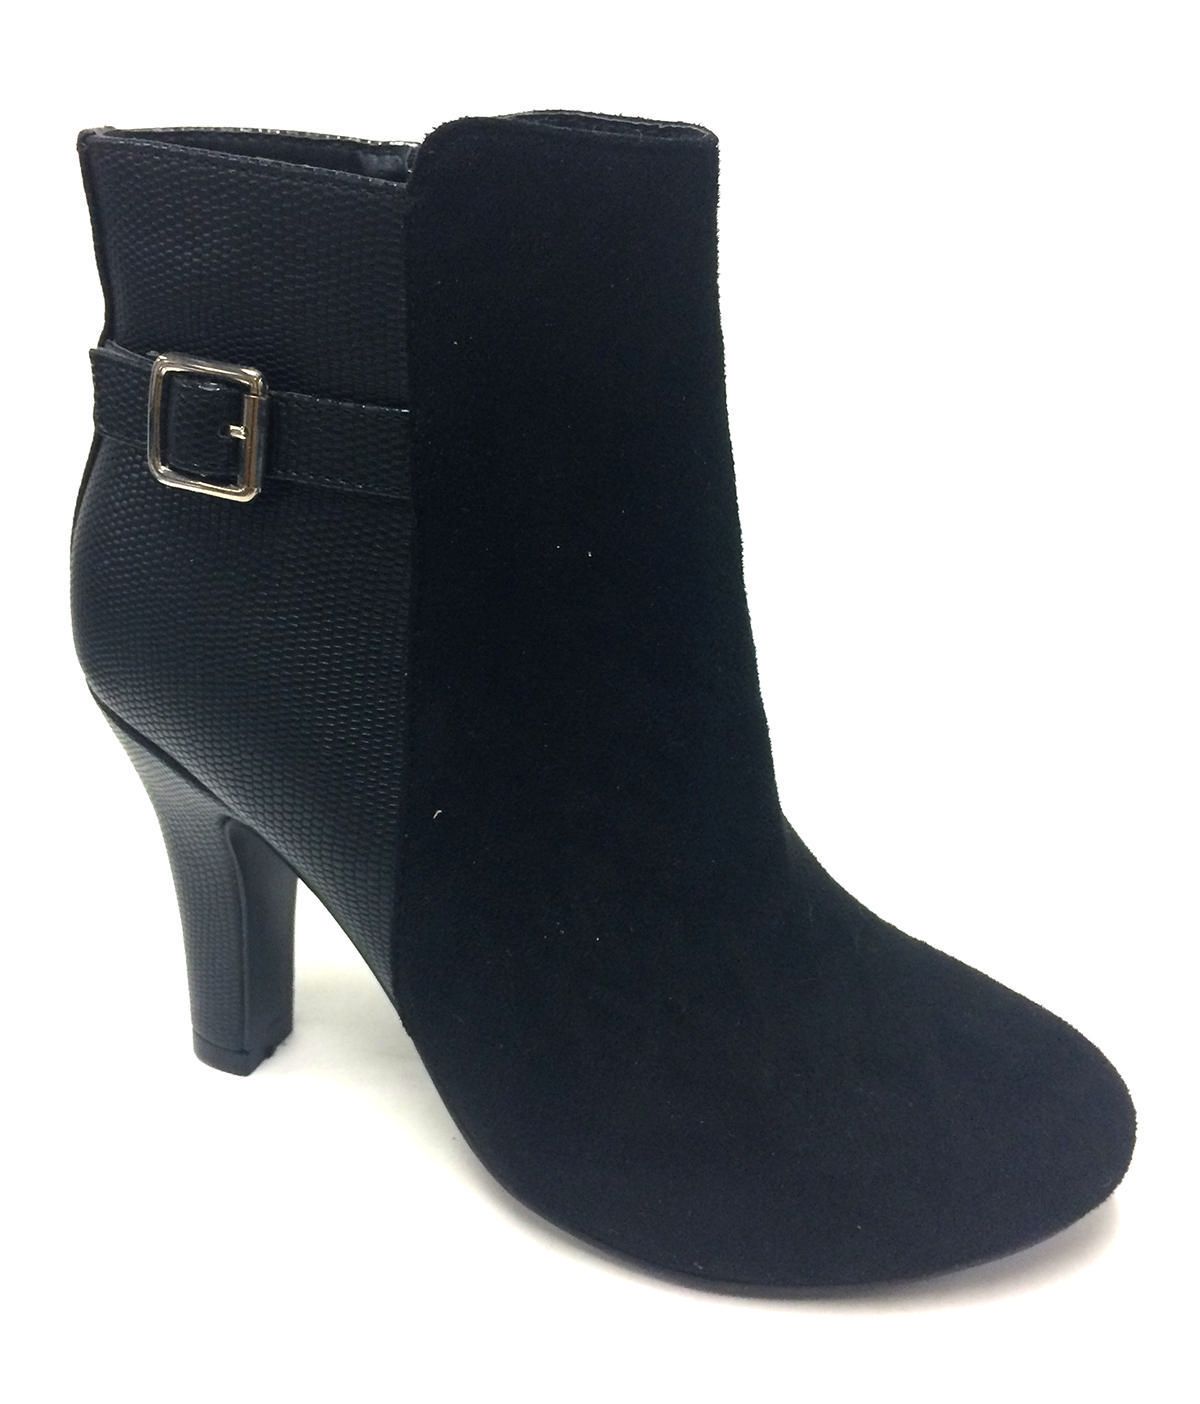 George Women's Camelia Ankle Boots | Walmart Canada